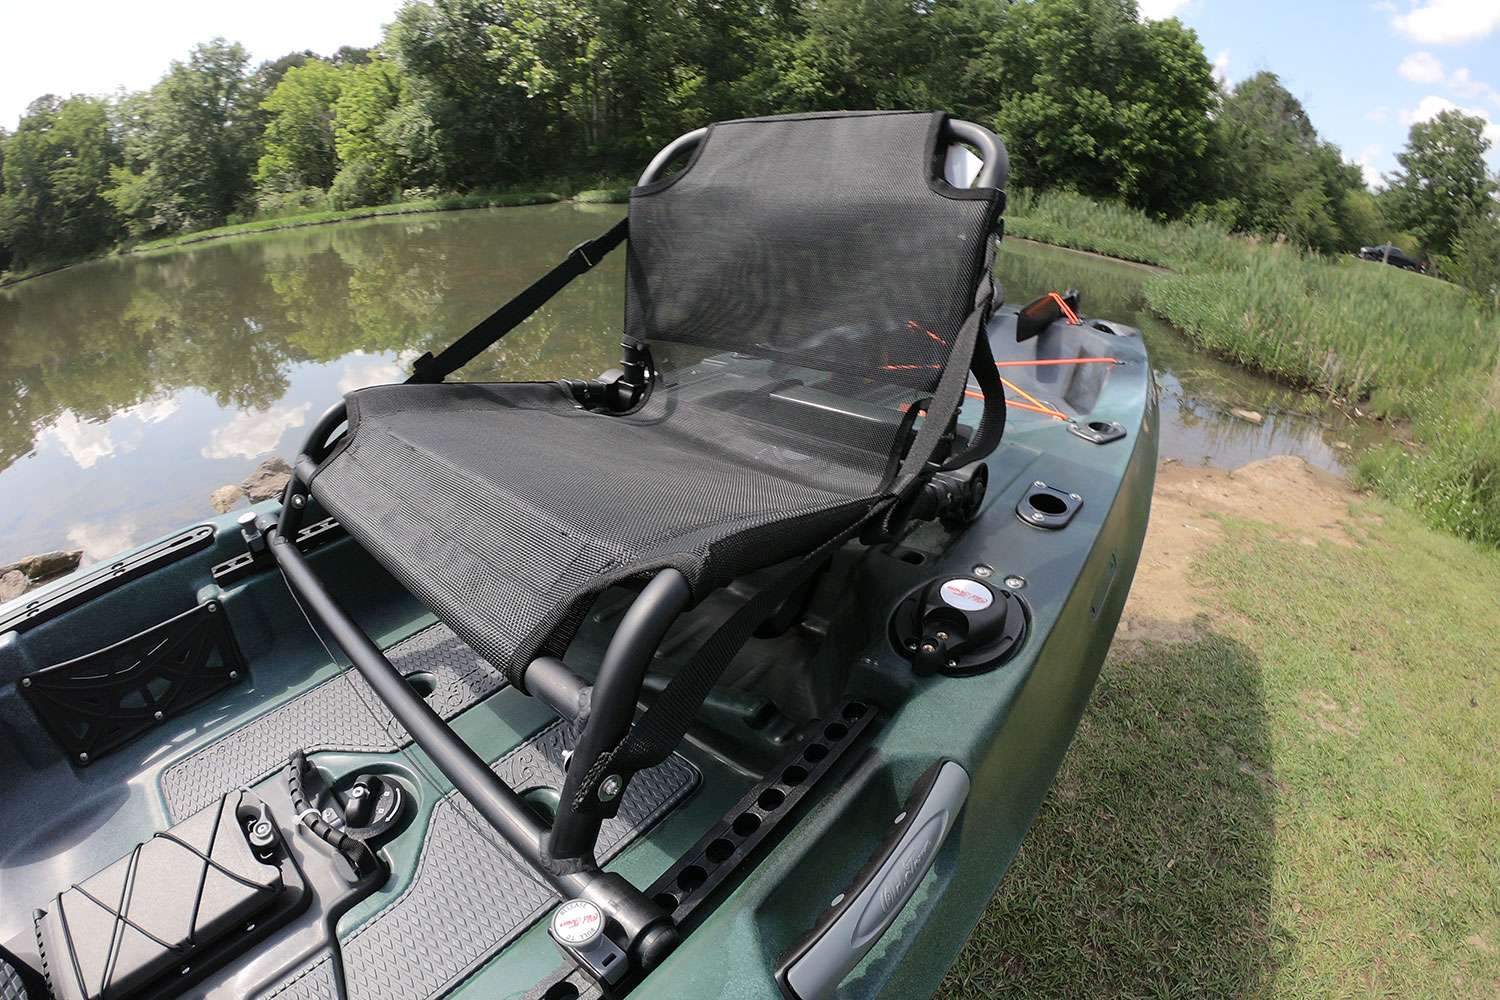 The seat folds down when traveling from lake to lake, but it quickly sits up.